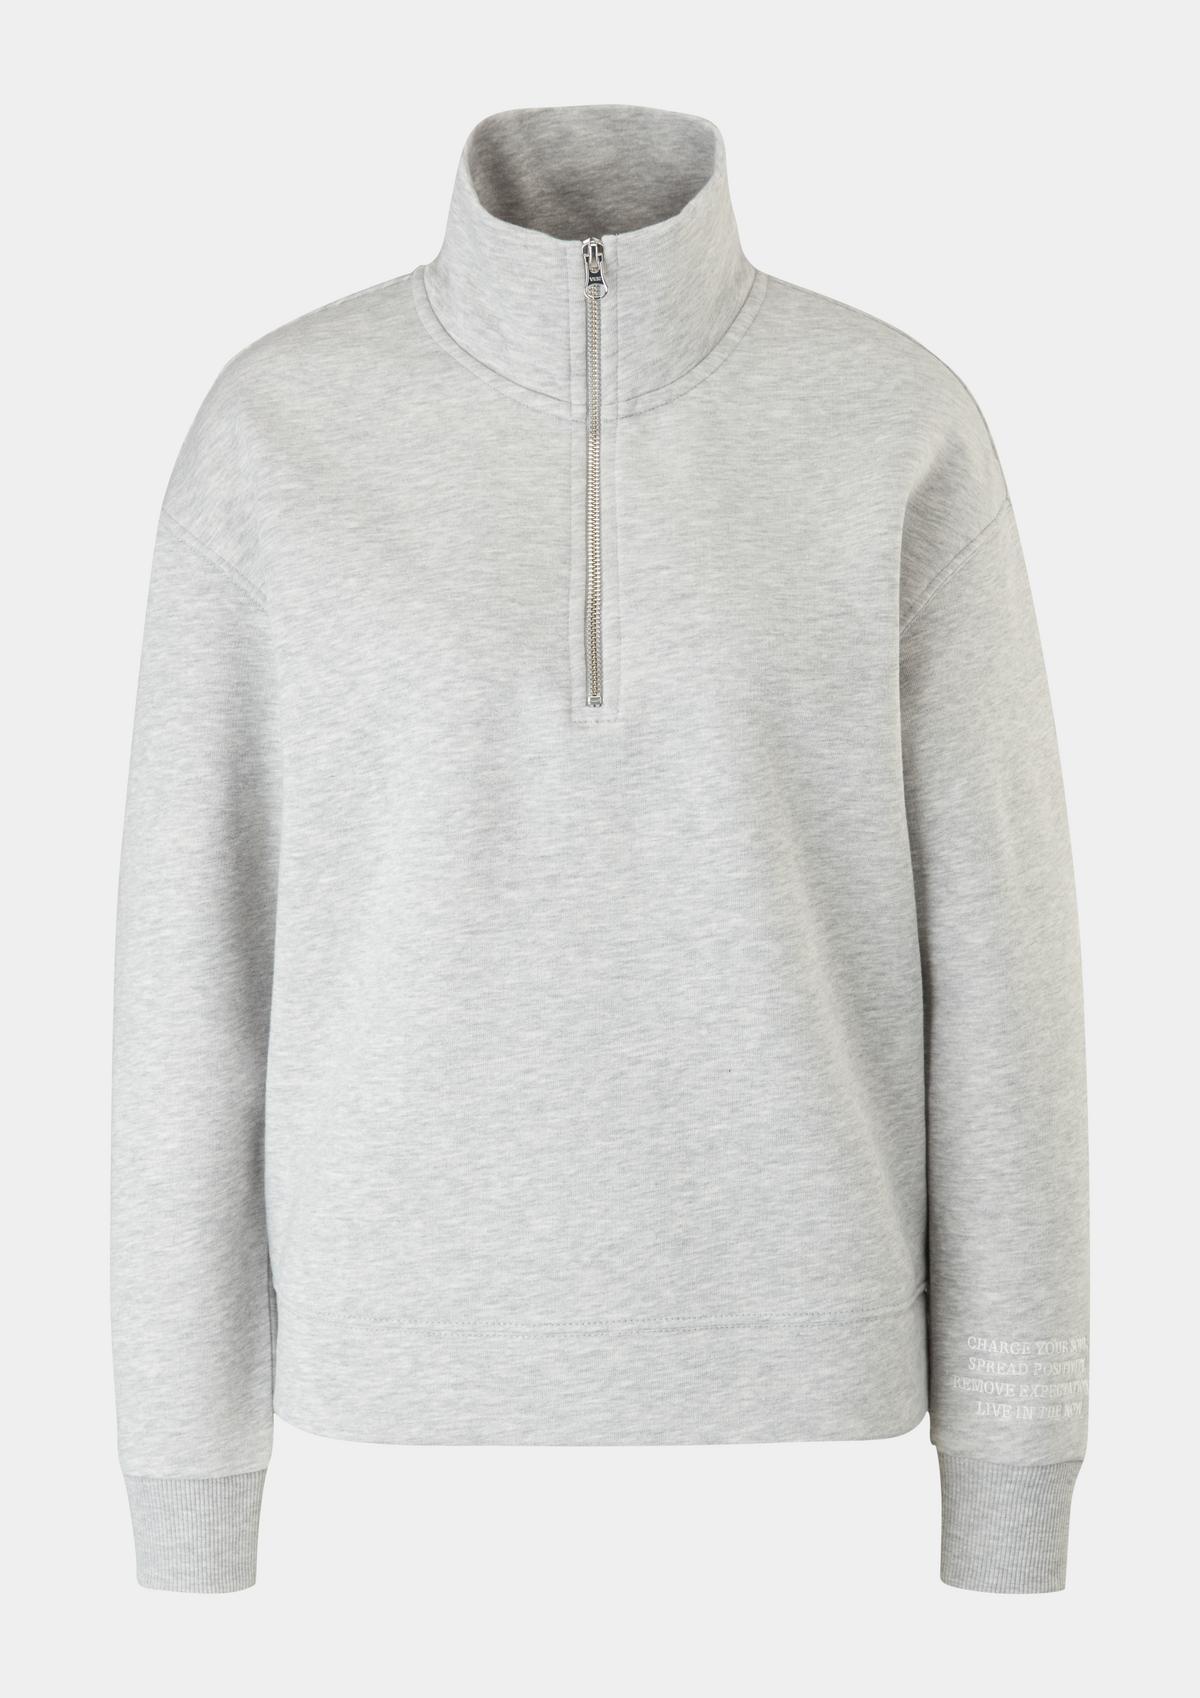 s.Oliver Sweatshirt with lettering